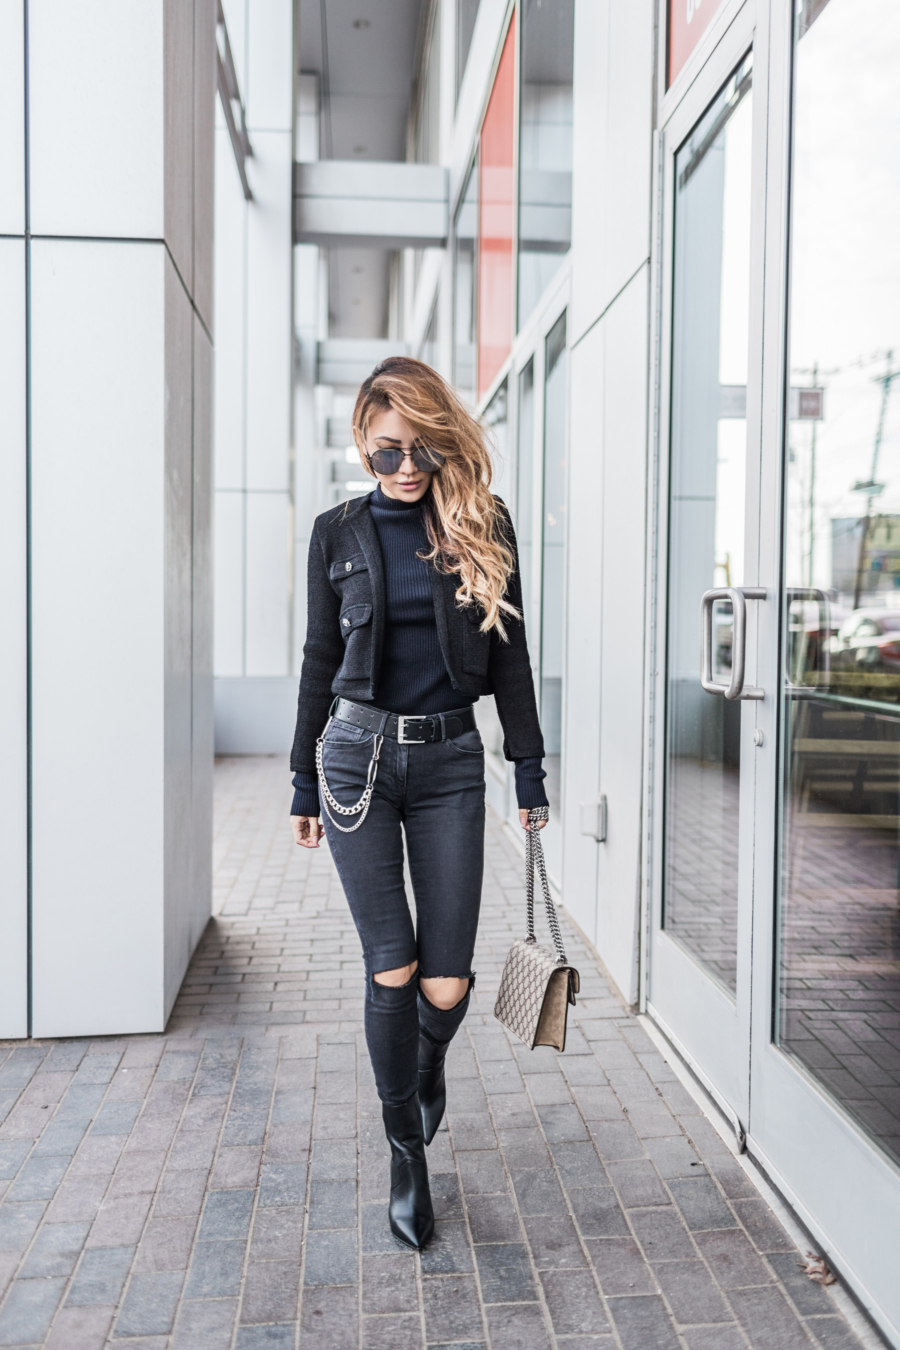 Nailing the all black outfit // jessicawang.com